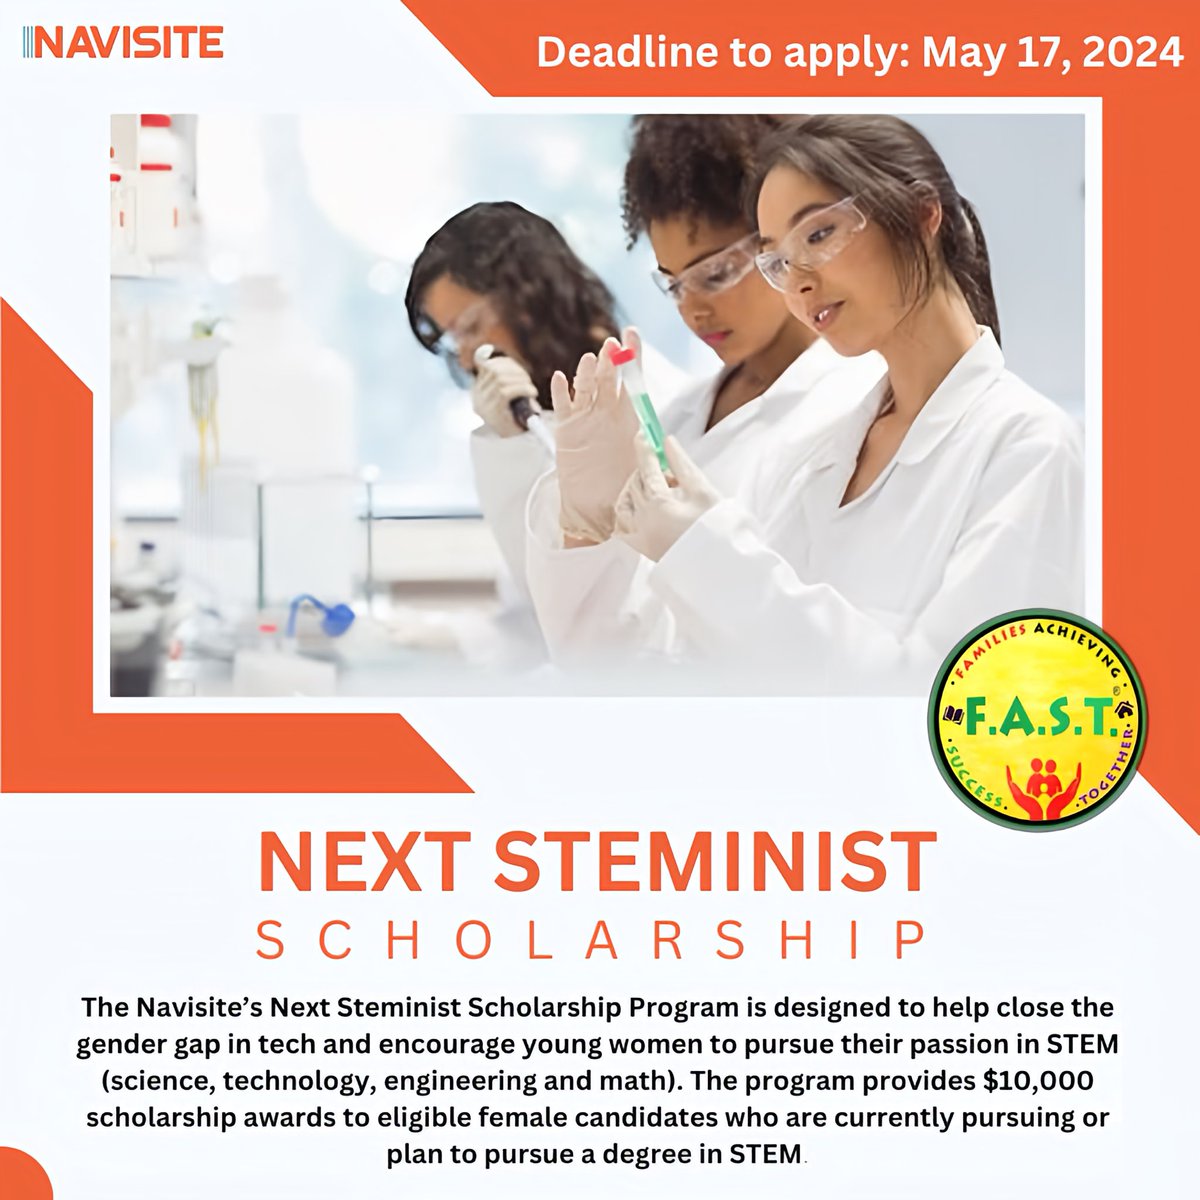 Navisite’s Next Steminist scholarship program is designed to help close the gender gap in tech and encourage young women to pursue their passion in STEM. 

Application Link: learnmore.scholarsapply.org/navisite/

#scholarship #school #college #education